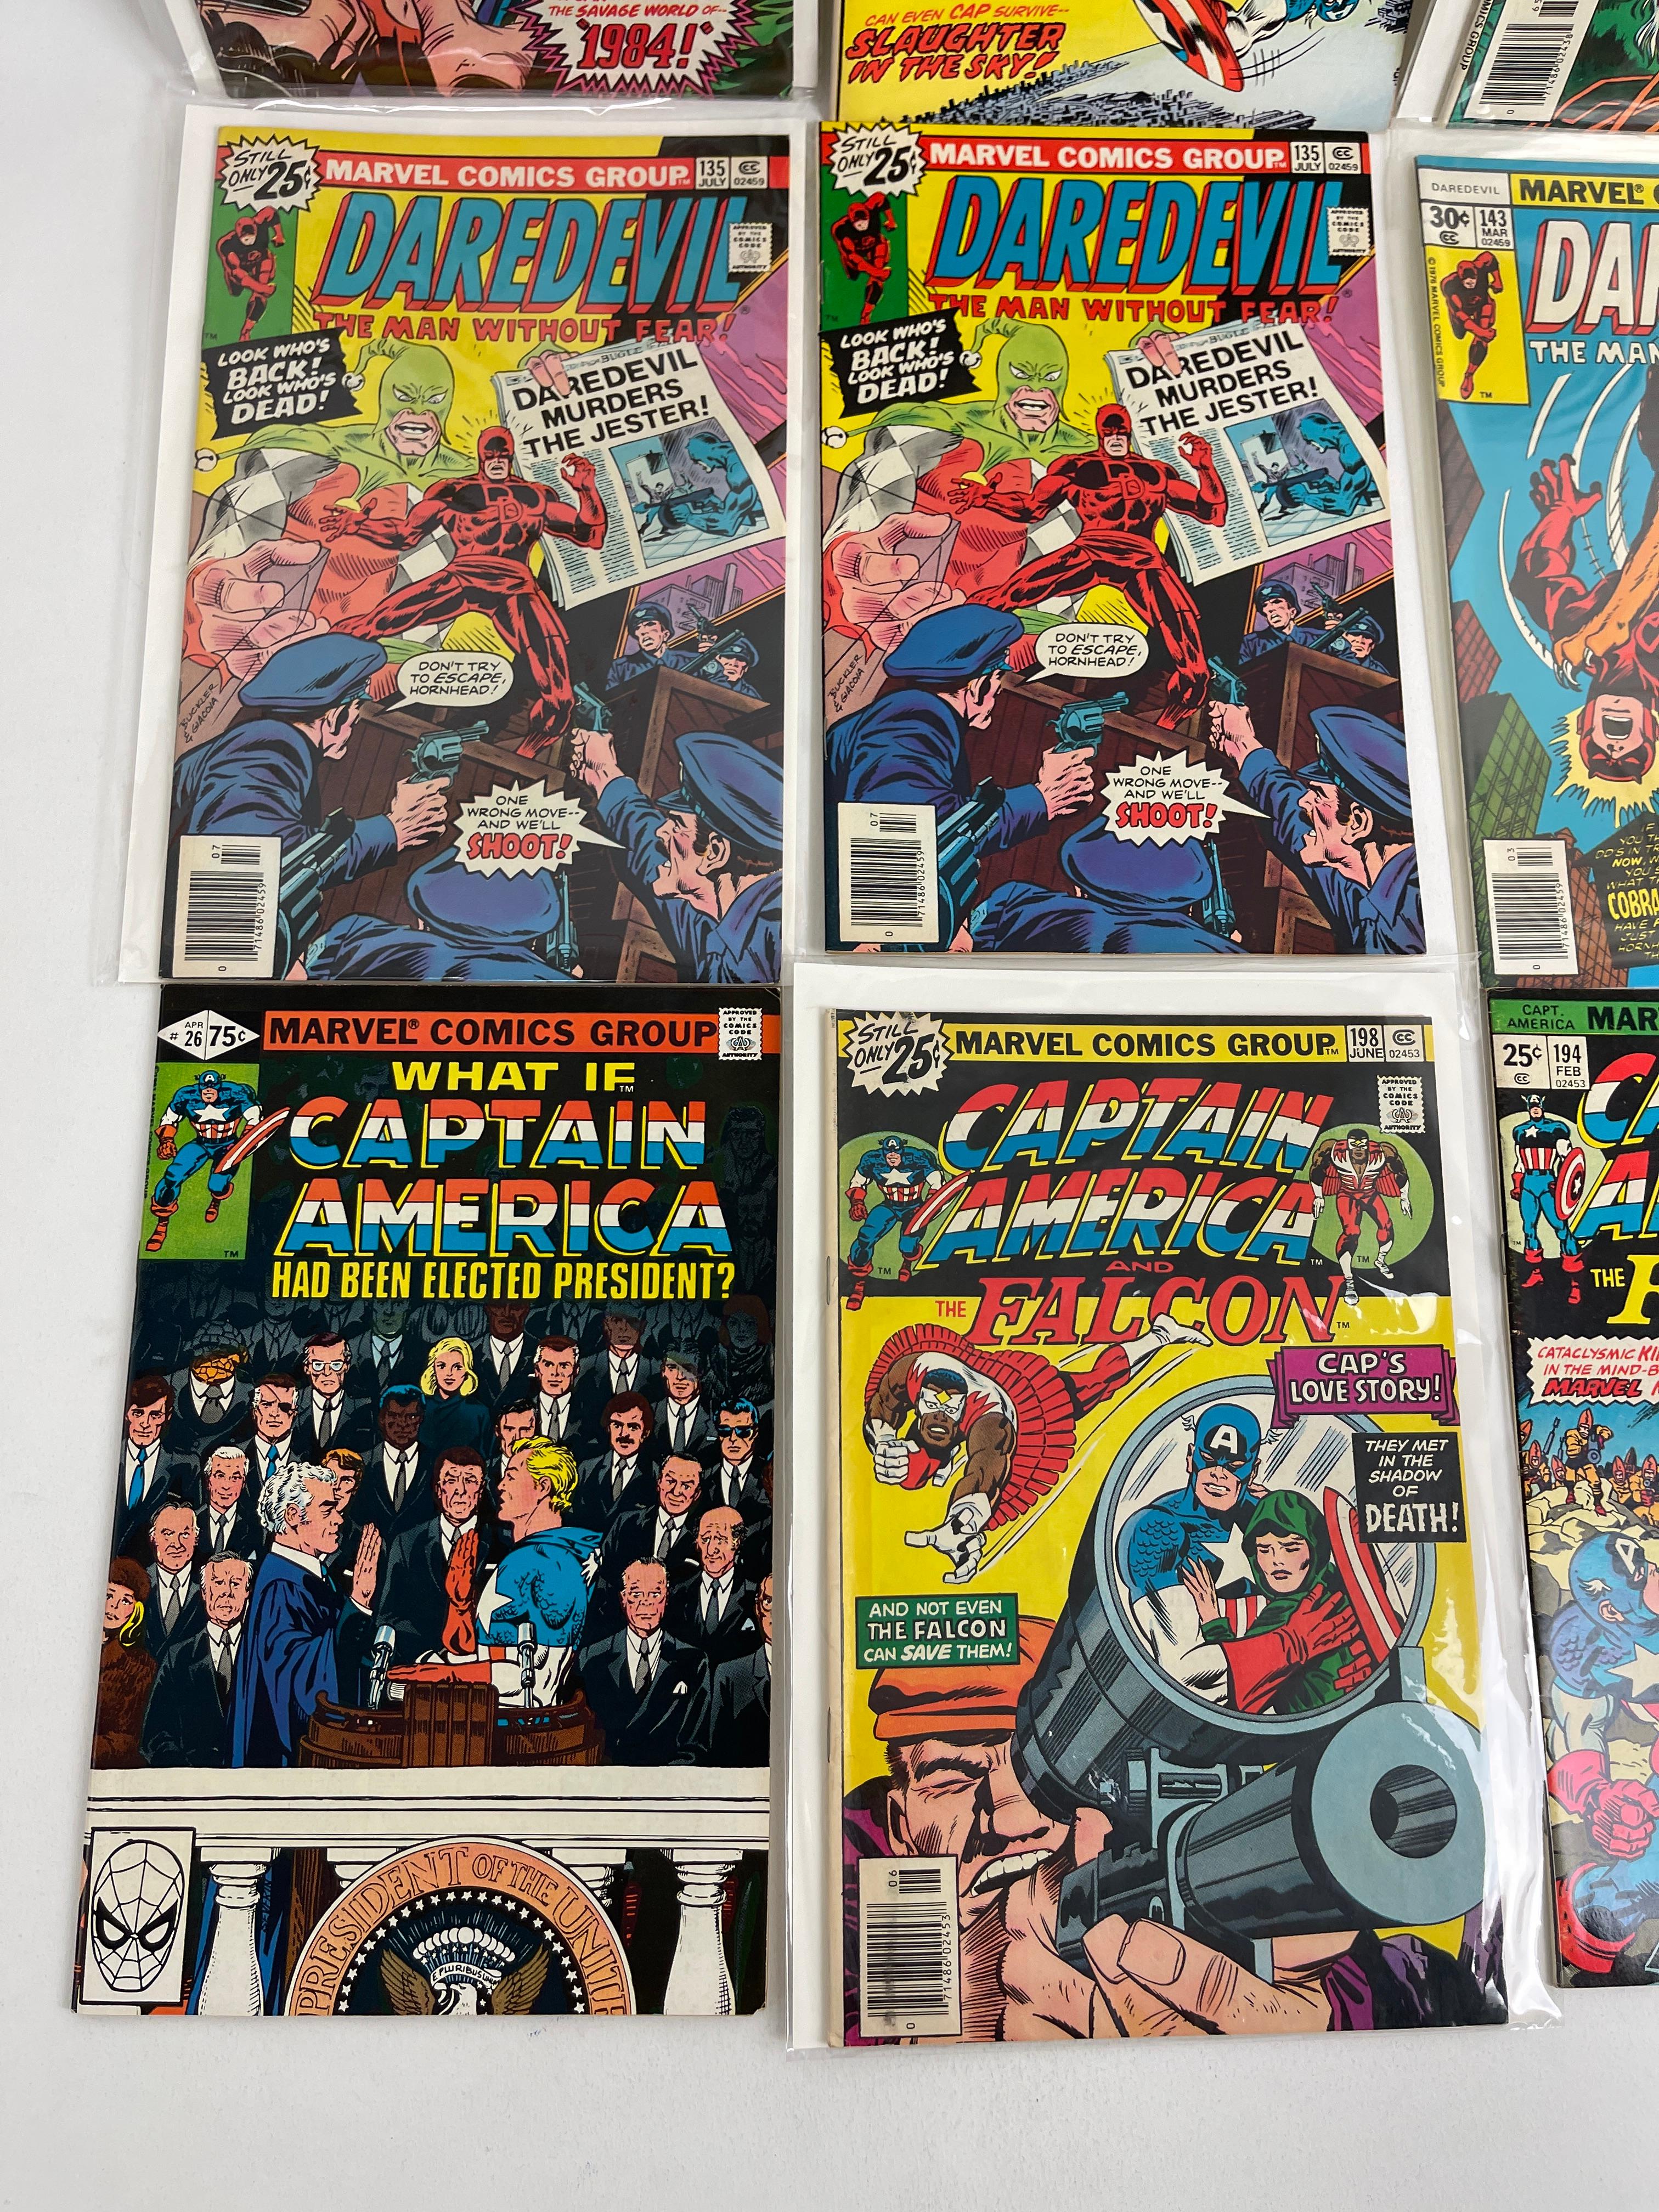 Vintage Daredevil and Captain America Mixed Marvel Comic Book Collection Lot of 9